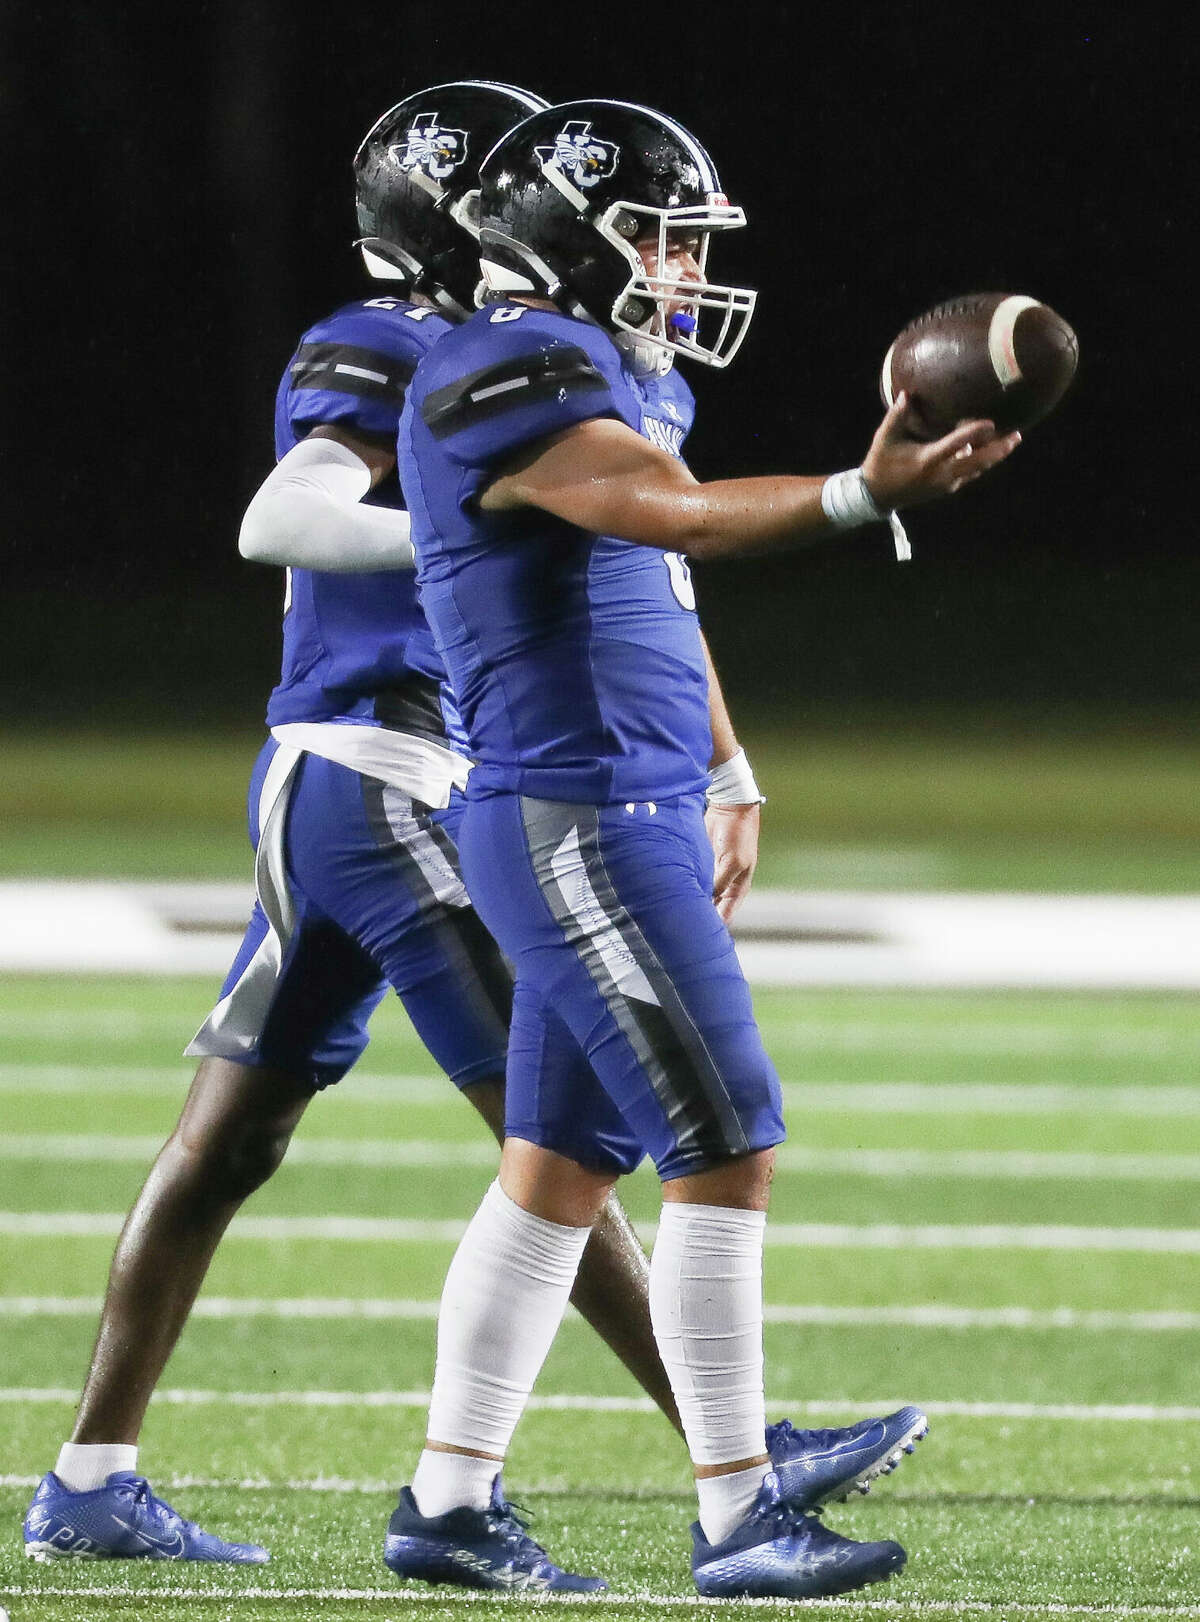 New Caney linebacker Trayce Baker (8) tosses the ball up in the air after recovering a Porter fumble in the second quarter of a non-district high school football game at Randall Reed Stadium, Friday, Sept. 2, 2022, in New Caney.